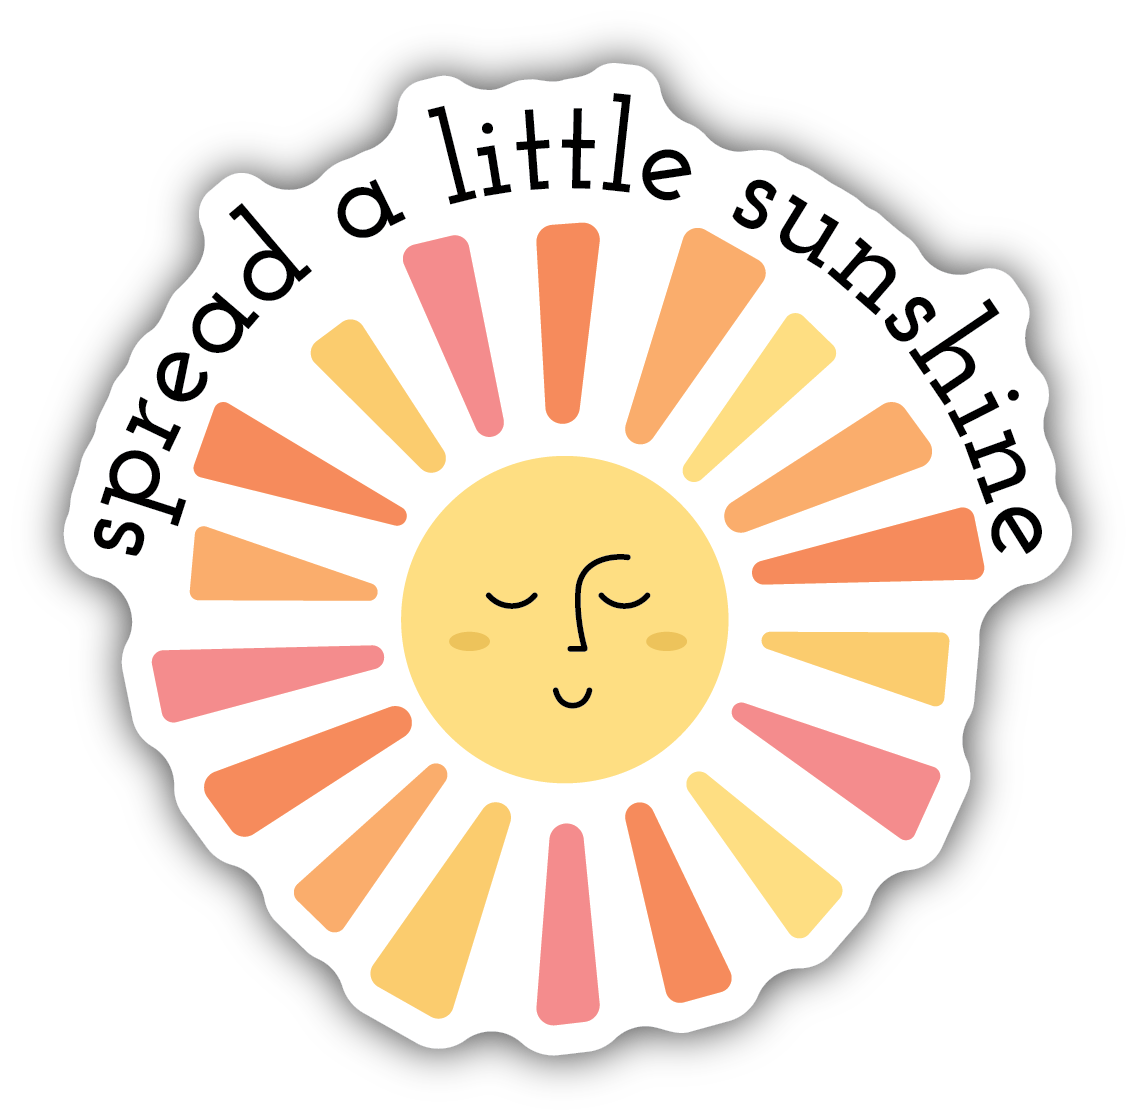 a pink, orange, and yellow sun with a smiley face and with text "spread a little sunshine"